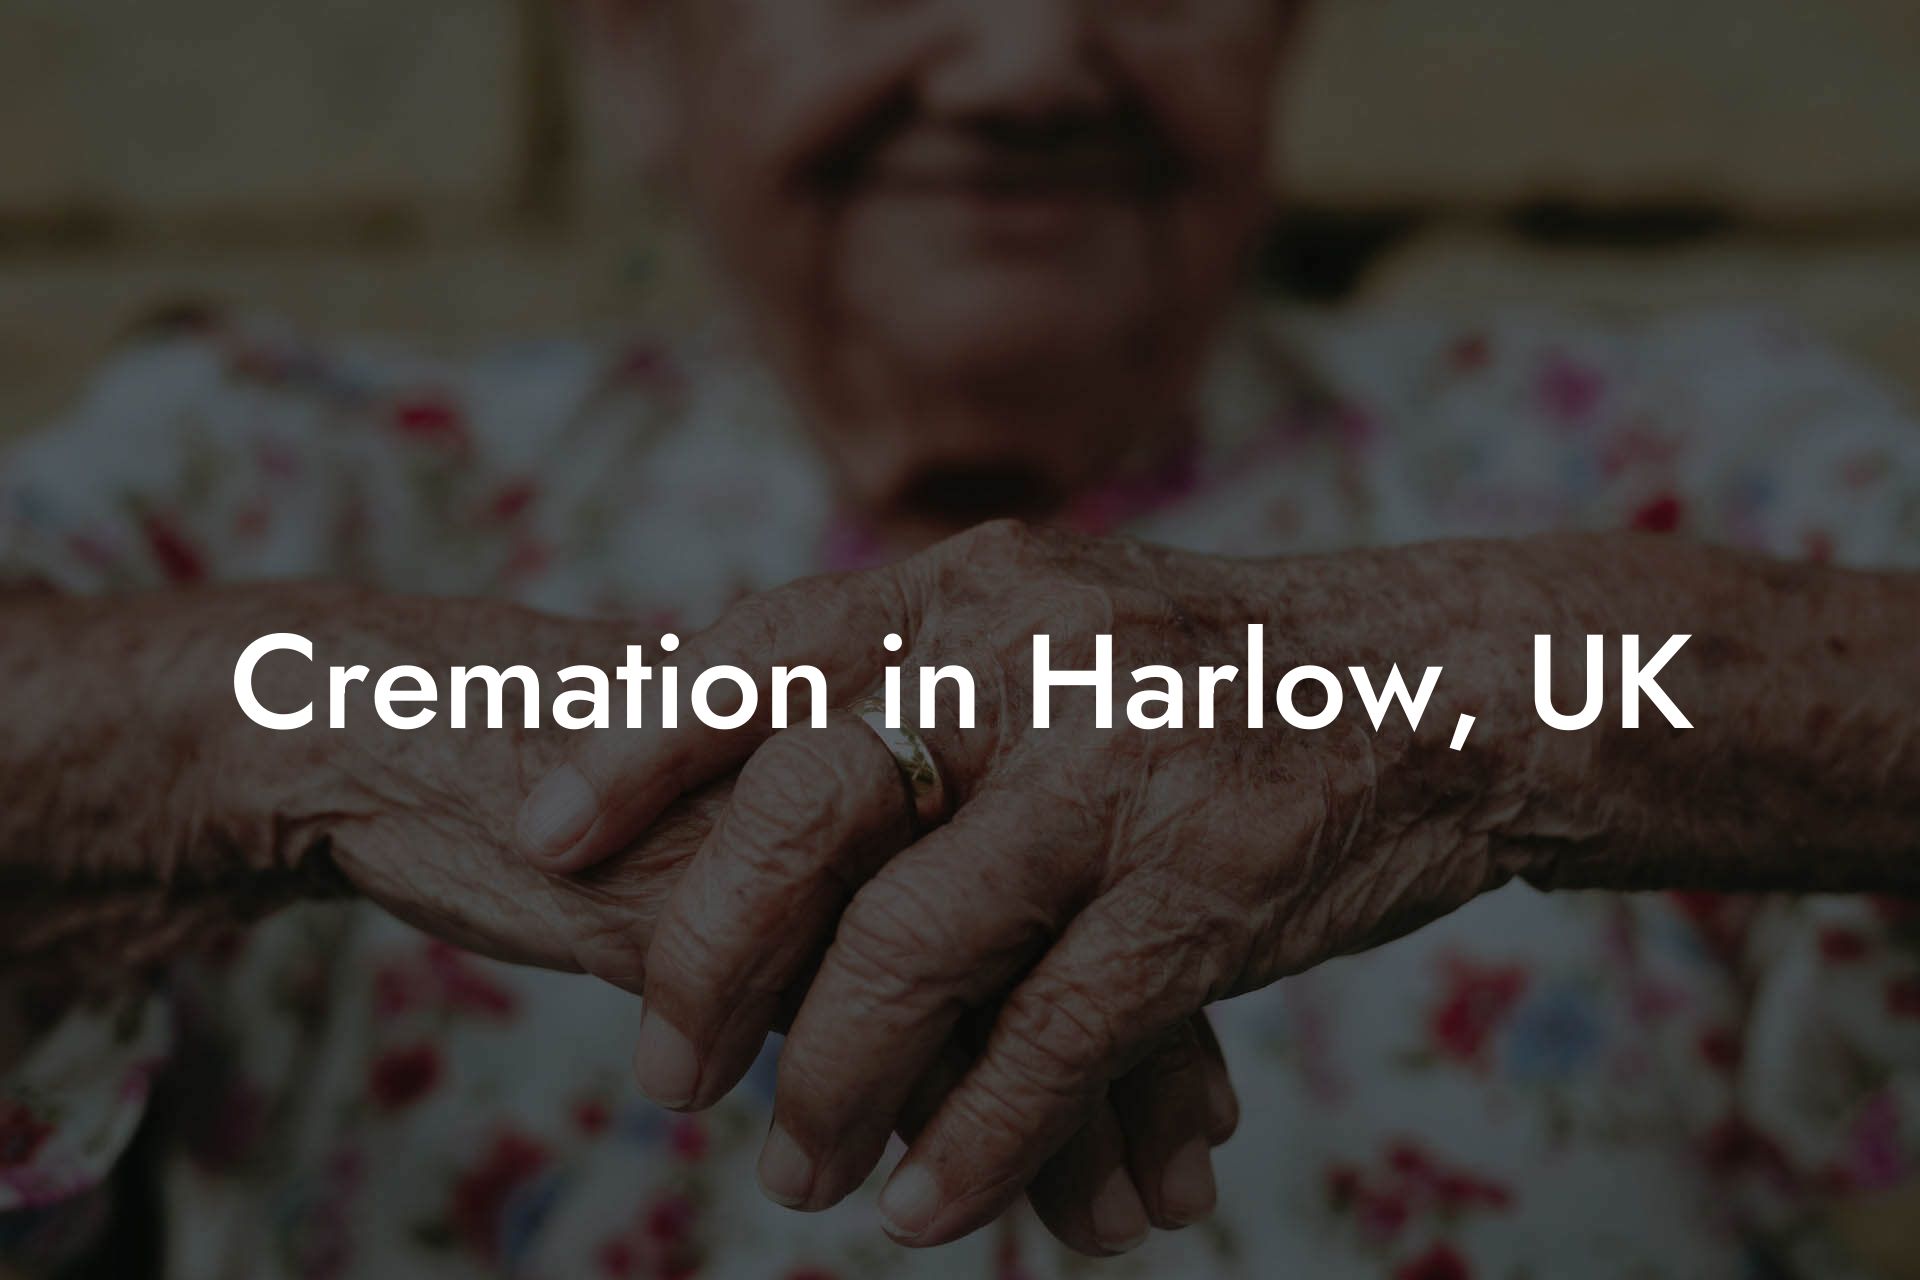 Cremation in Harlow, UK